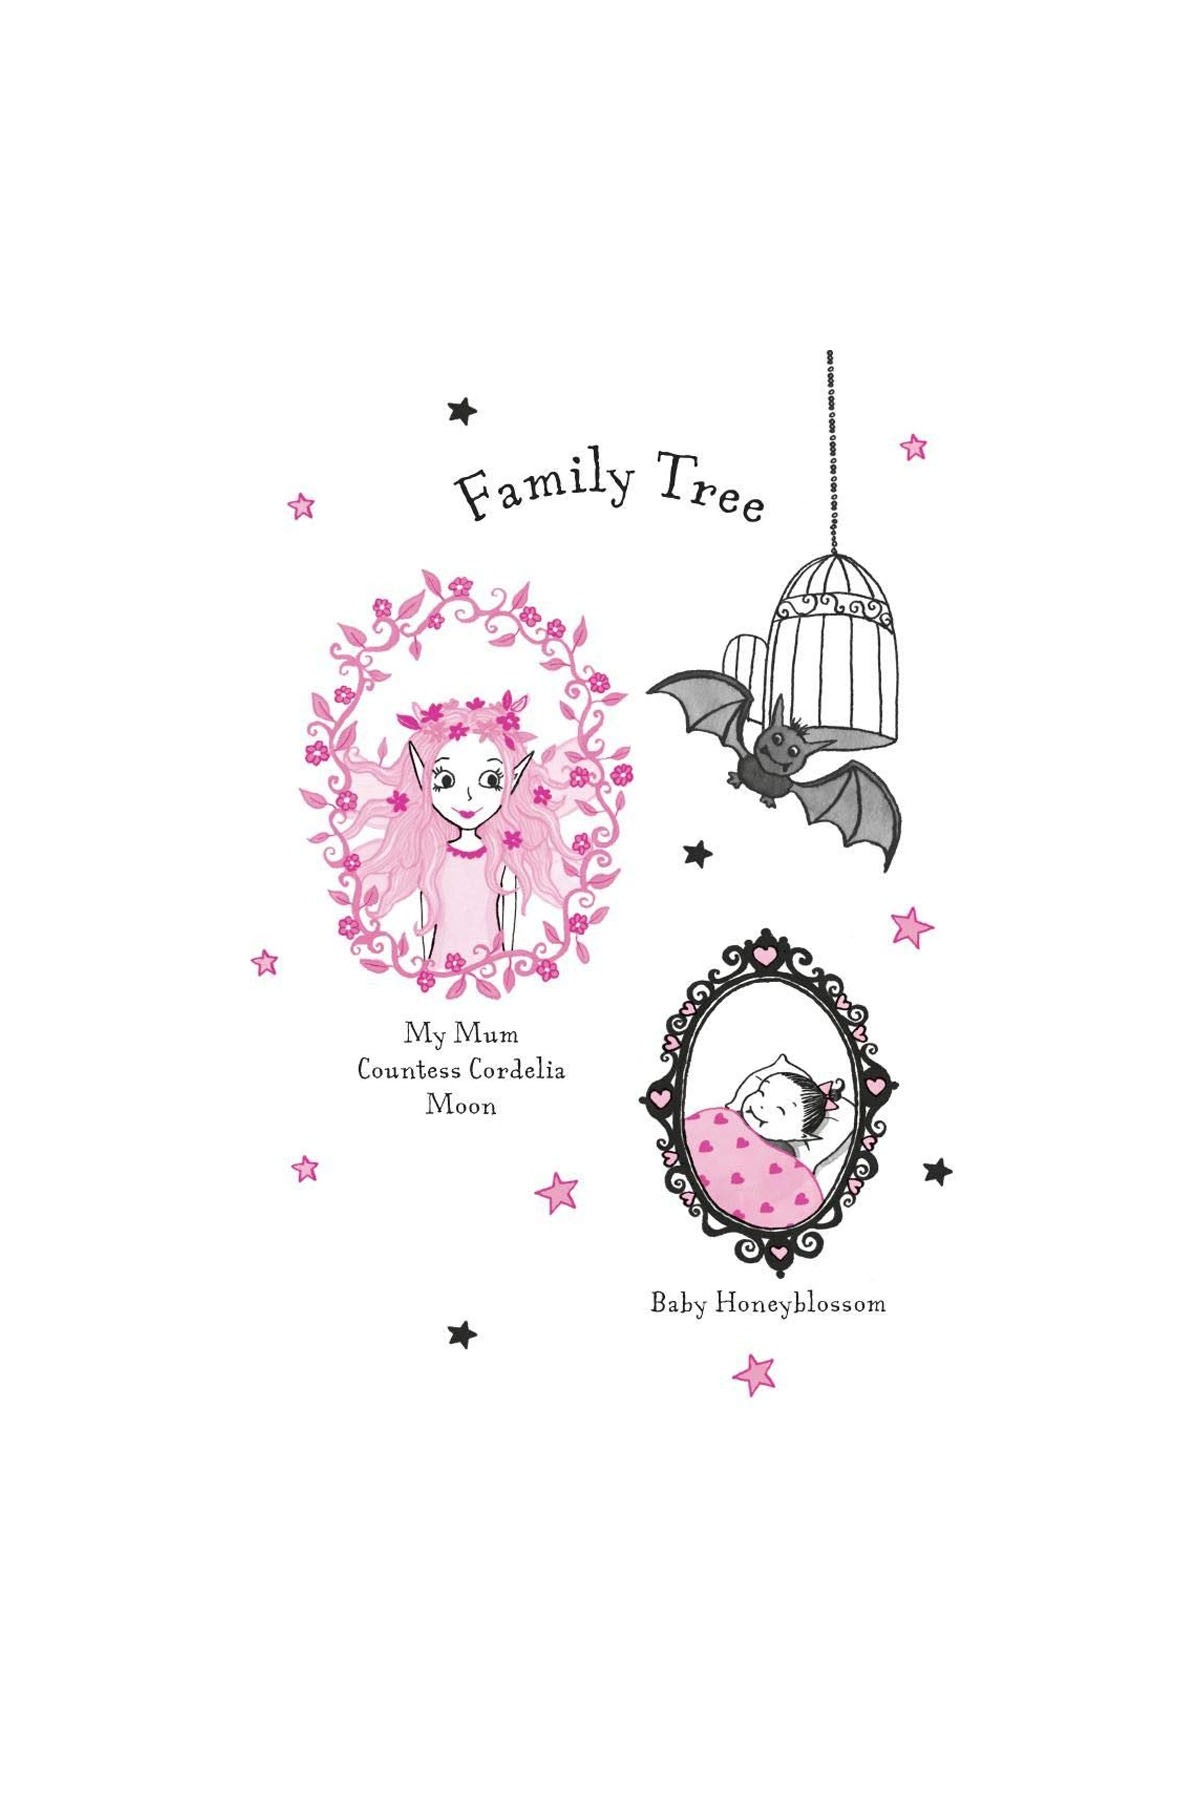 Oxford Childrens Book - Isadora Moon Has A Sleepover